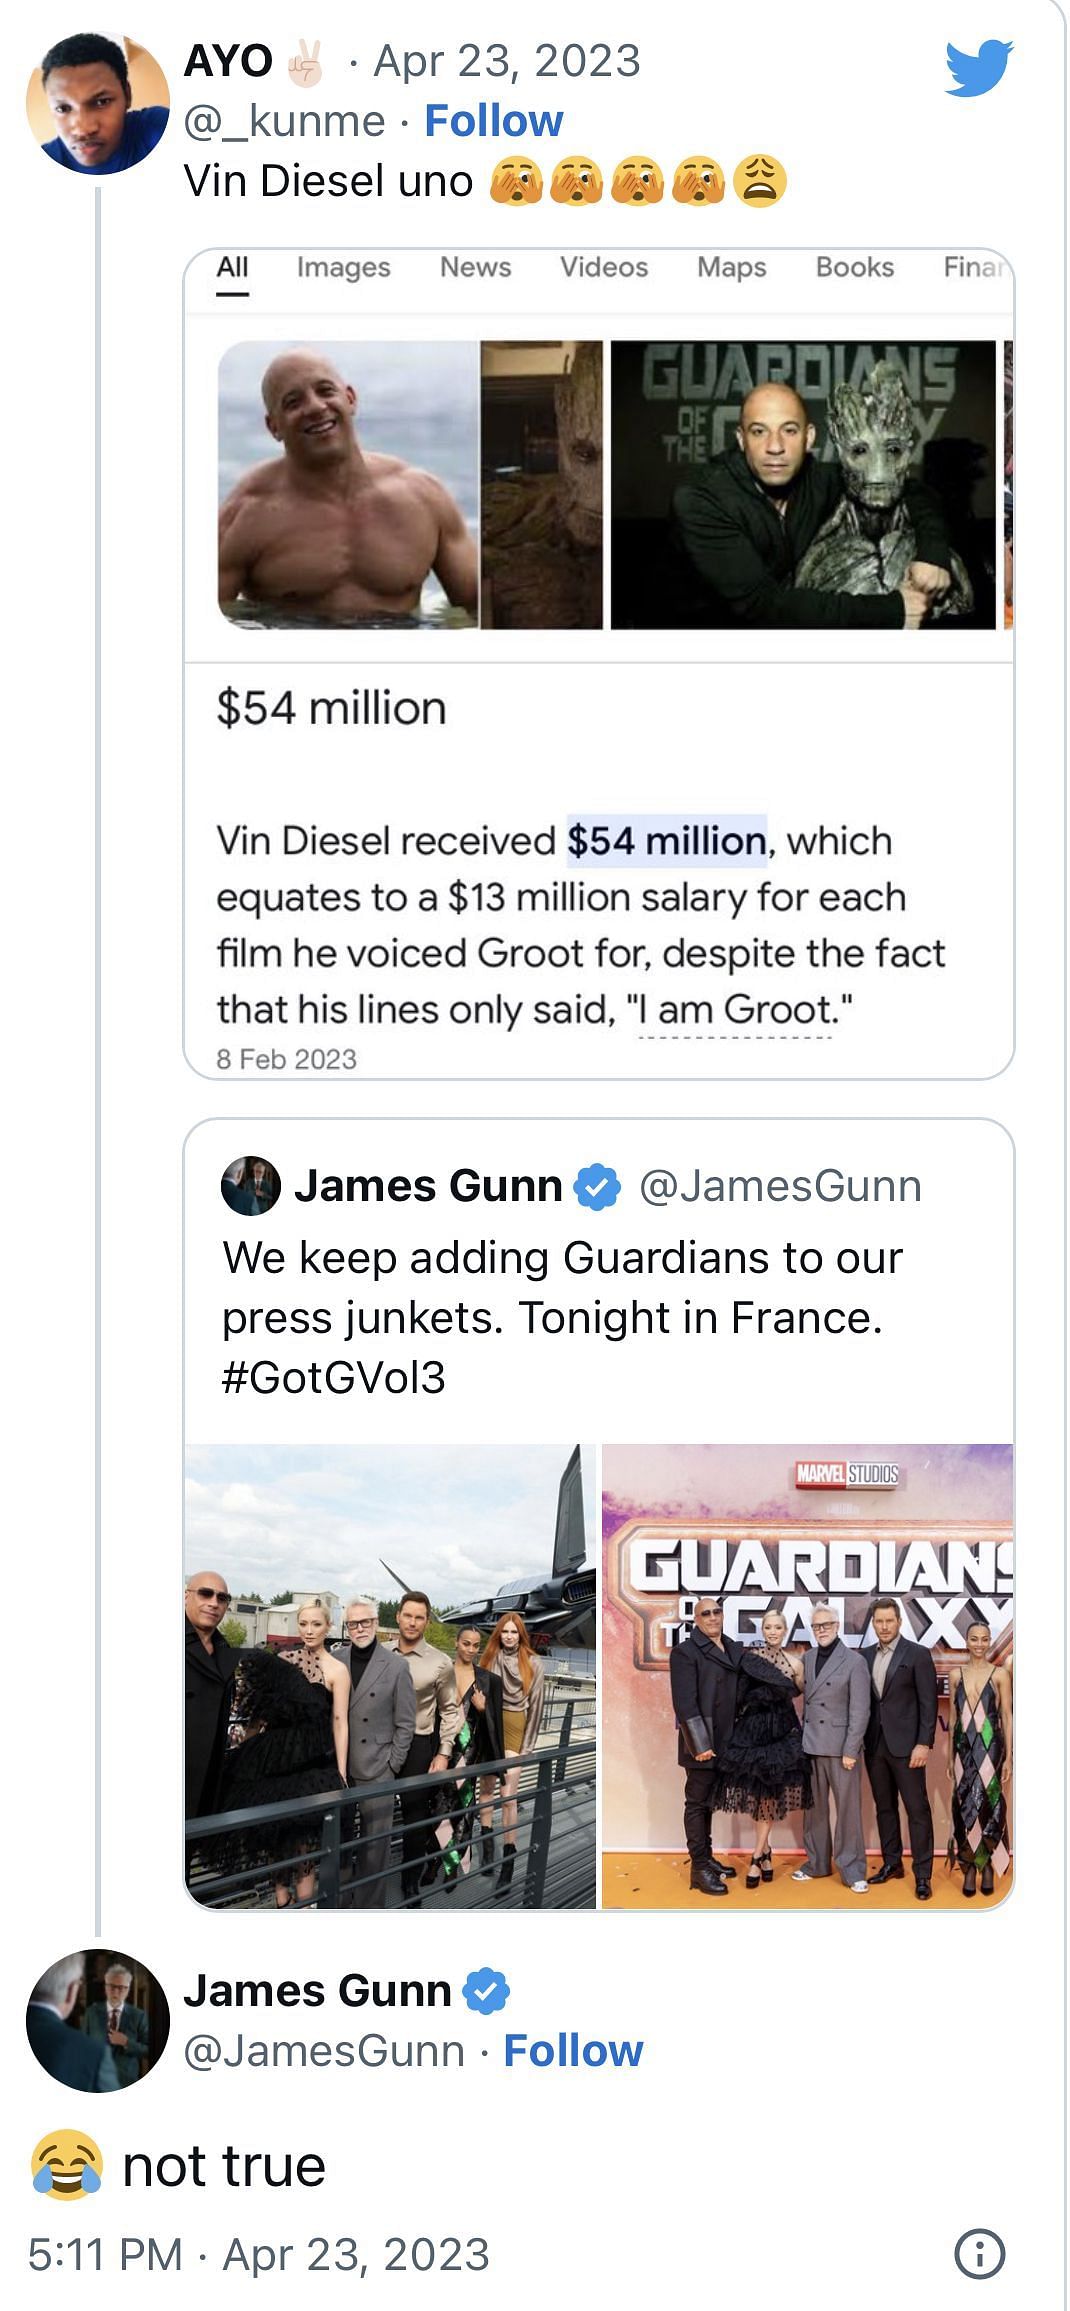 James Gunn shuts down rumors of Vin Diesel&#039;s reported $54 million payday for voicing Groot in the Marvel Cinematic Universe in a tweet (Image via James Gunn Twitter)